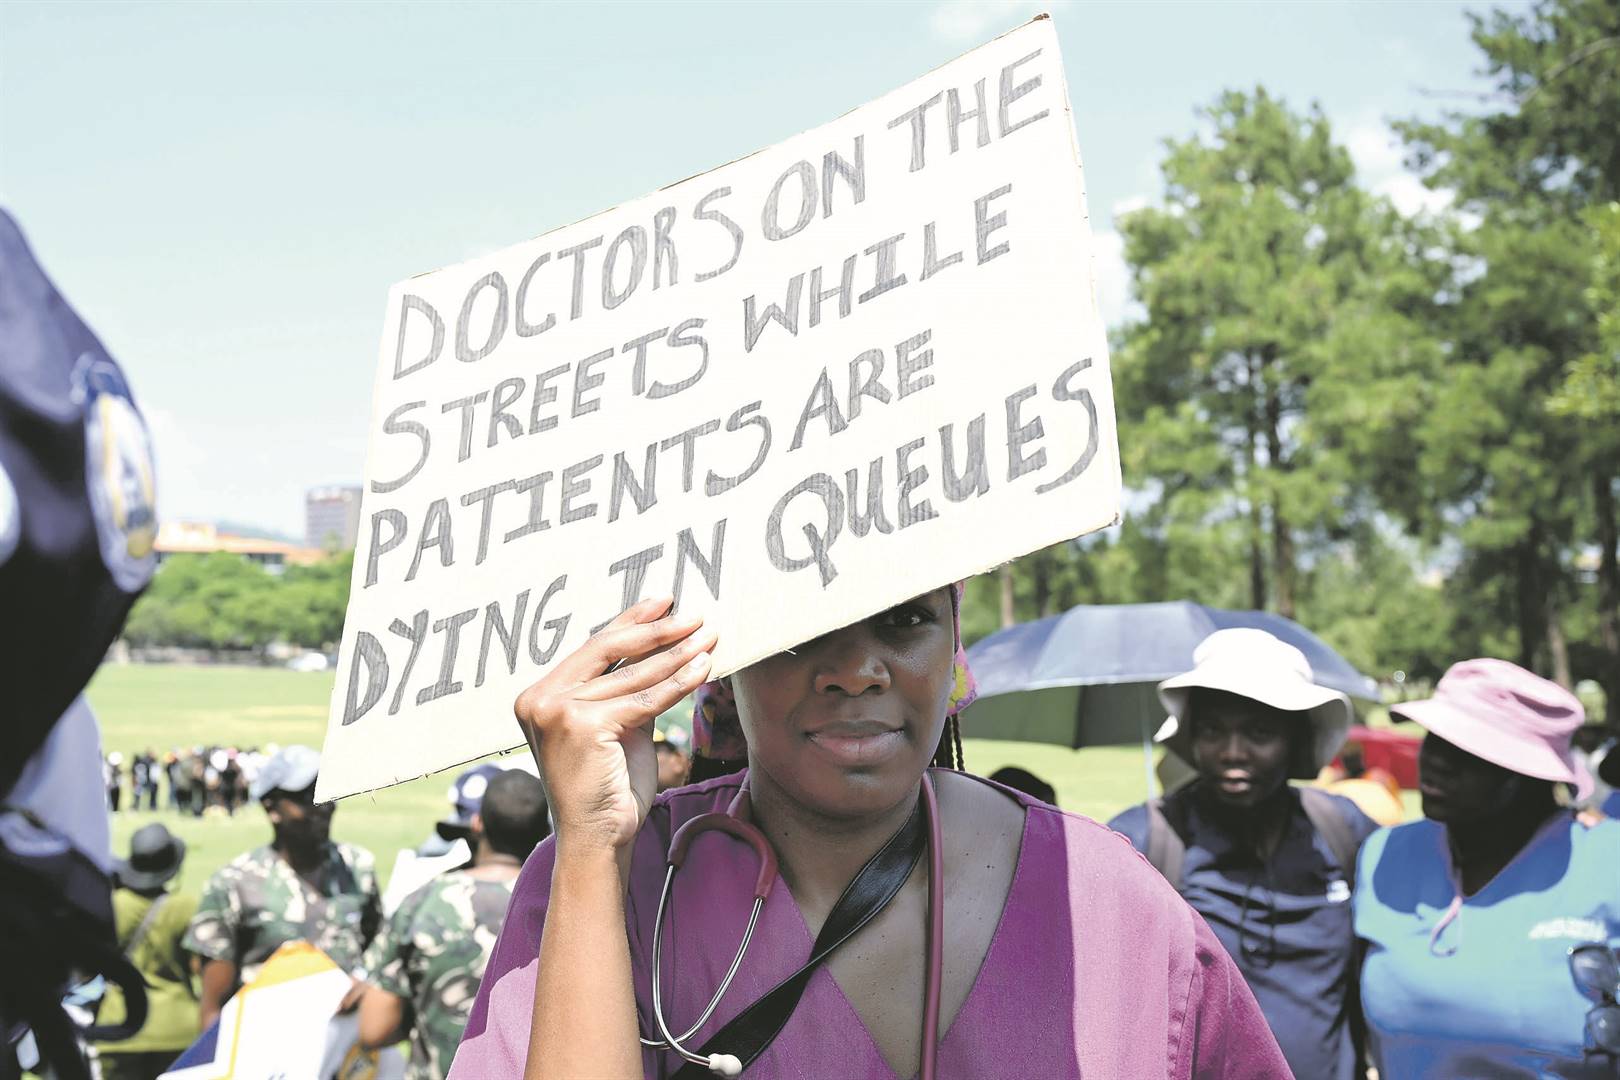  DA lamented that doctors were “up in arms” by what they saw as the centralisation of overtime approvals that would lead to delays and cuts in their overtime payments 